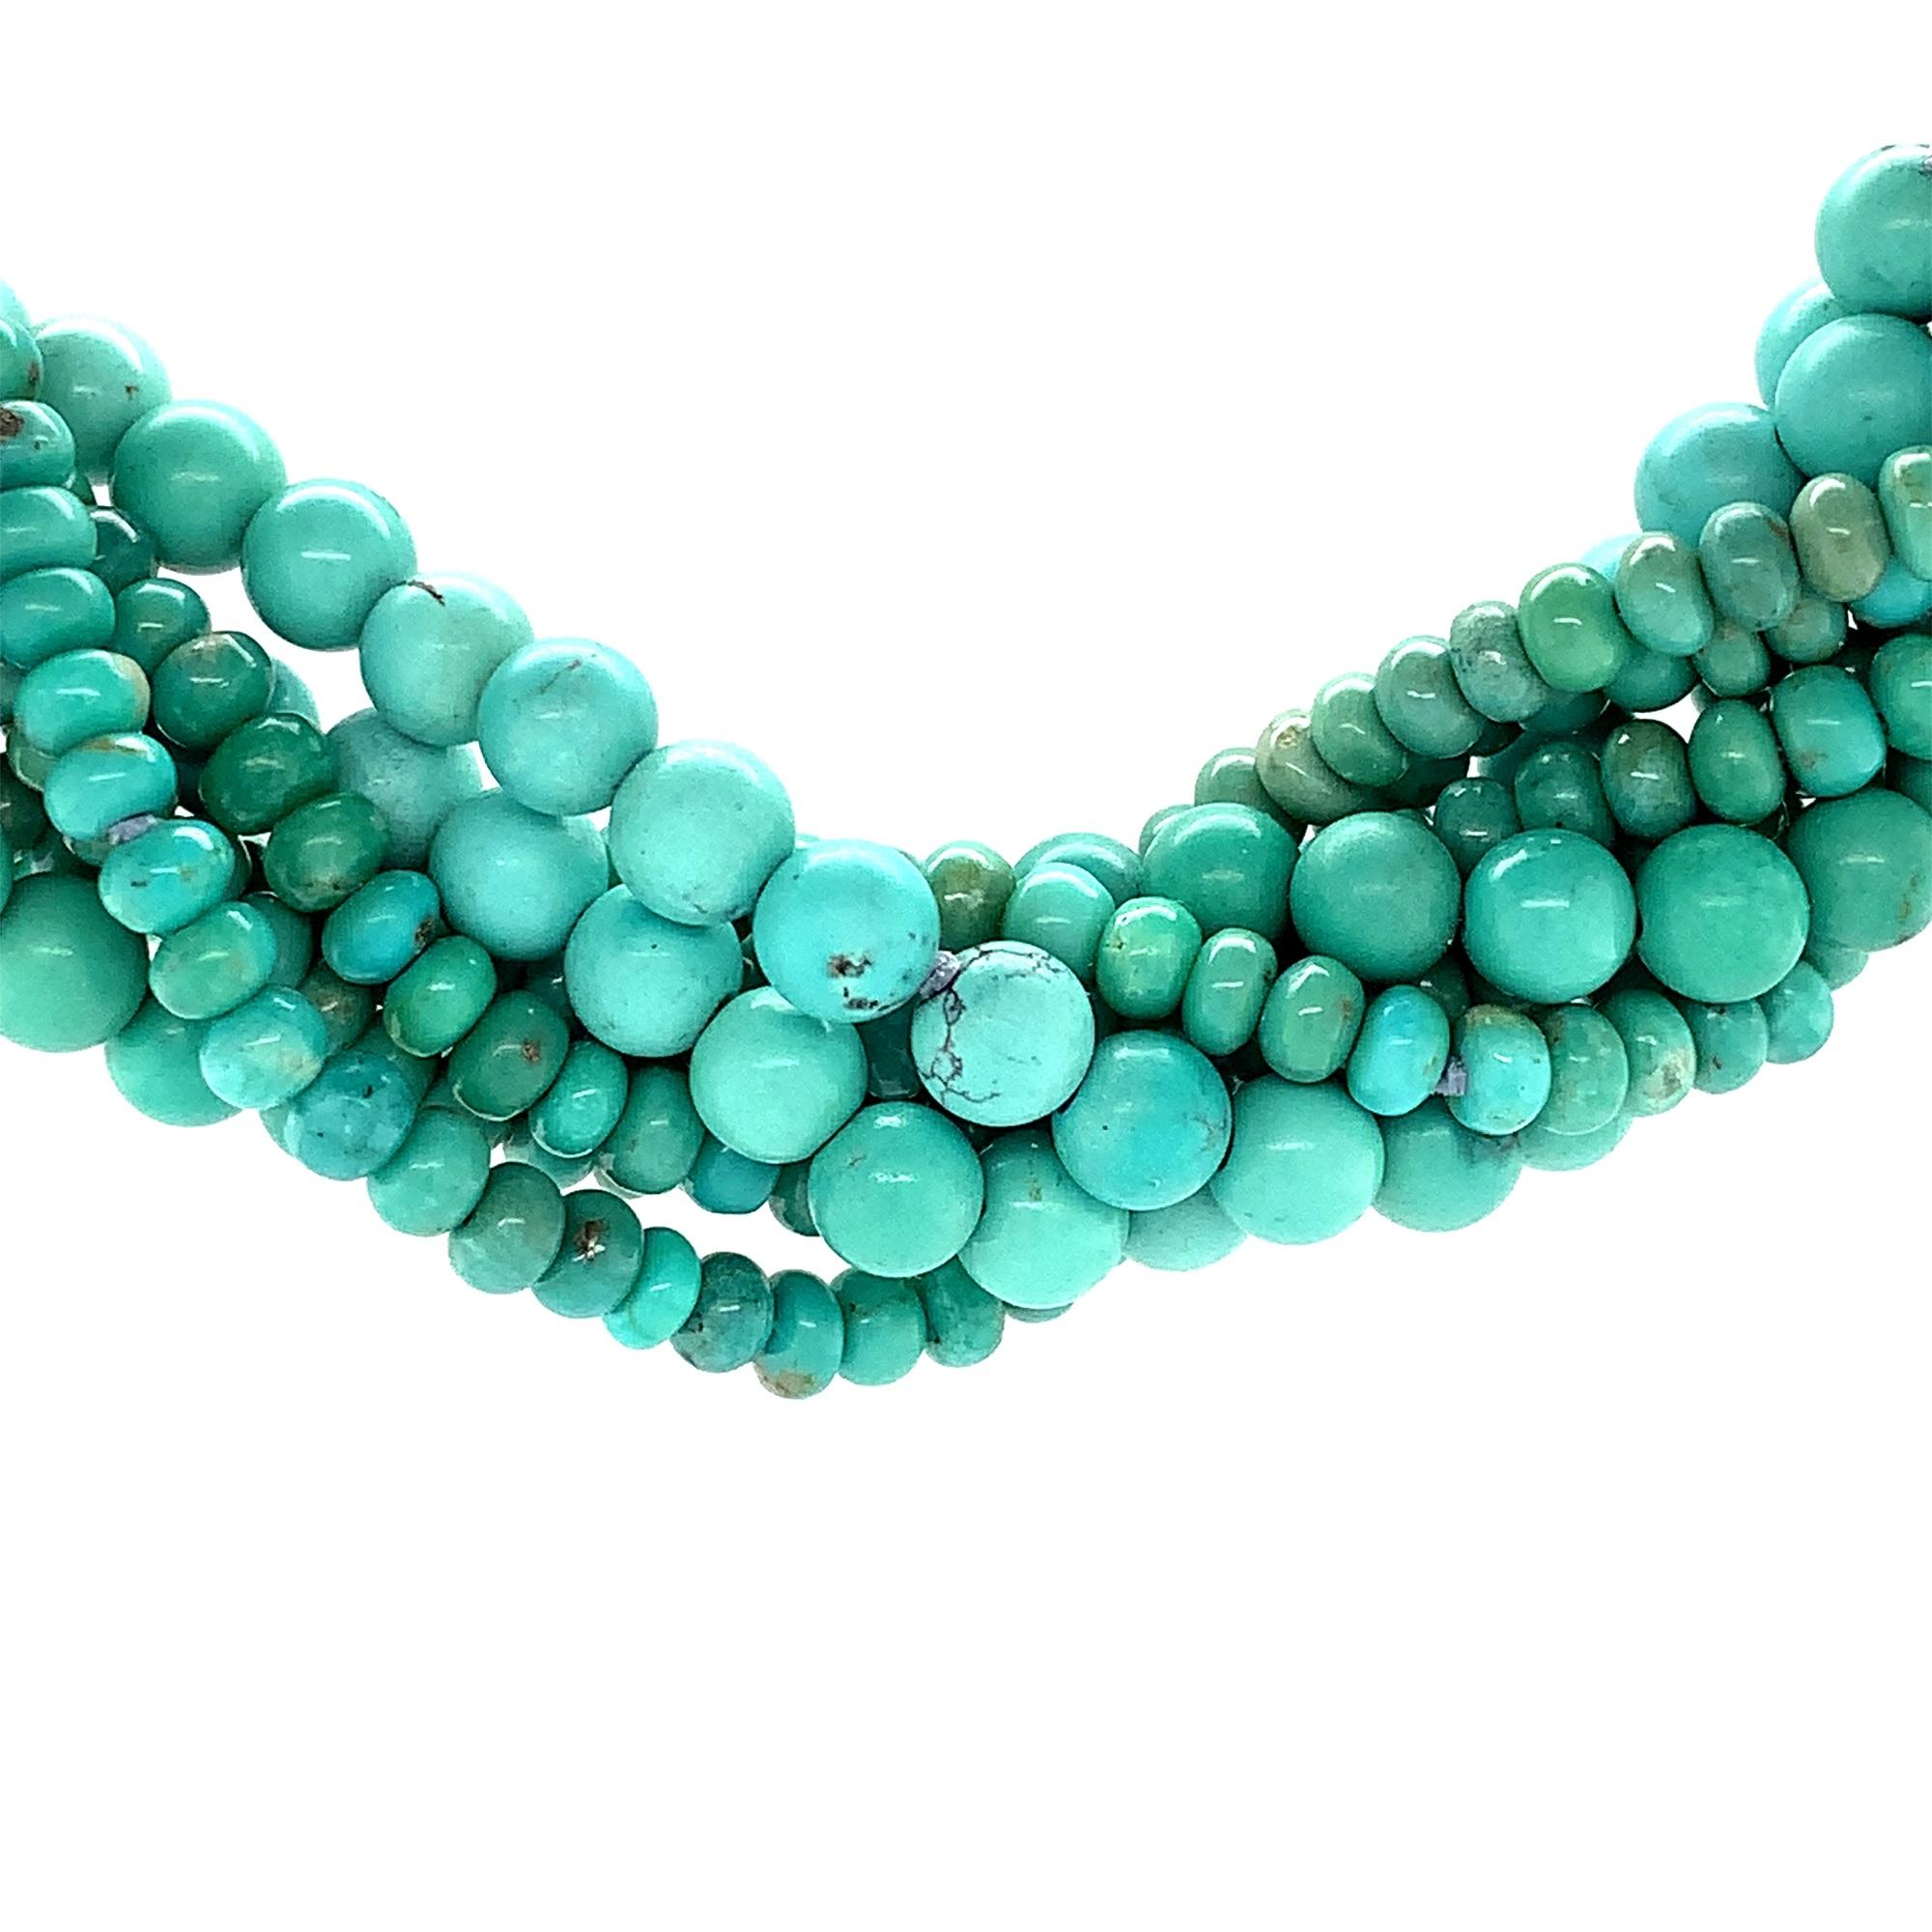  An 8 strand natural Sonoran turquoise torsade necklace with 14K yellow gold magnetic clasp. There are 5 strands of Campitos turquoise 4mm beads and 3 strands of Campo Frio turquoise 6mm beads. There is a total of 384 carats of turquoise. The